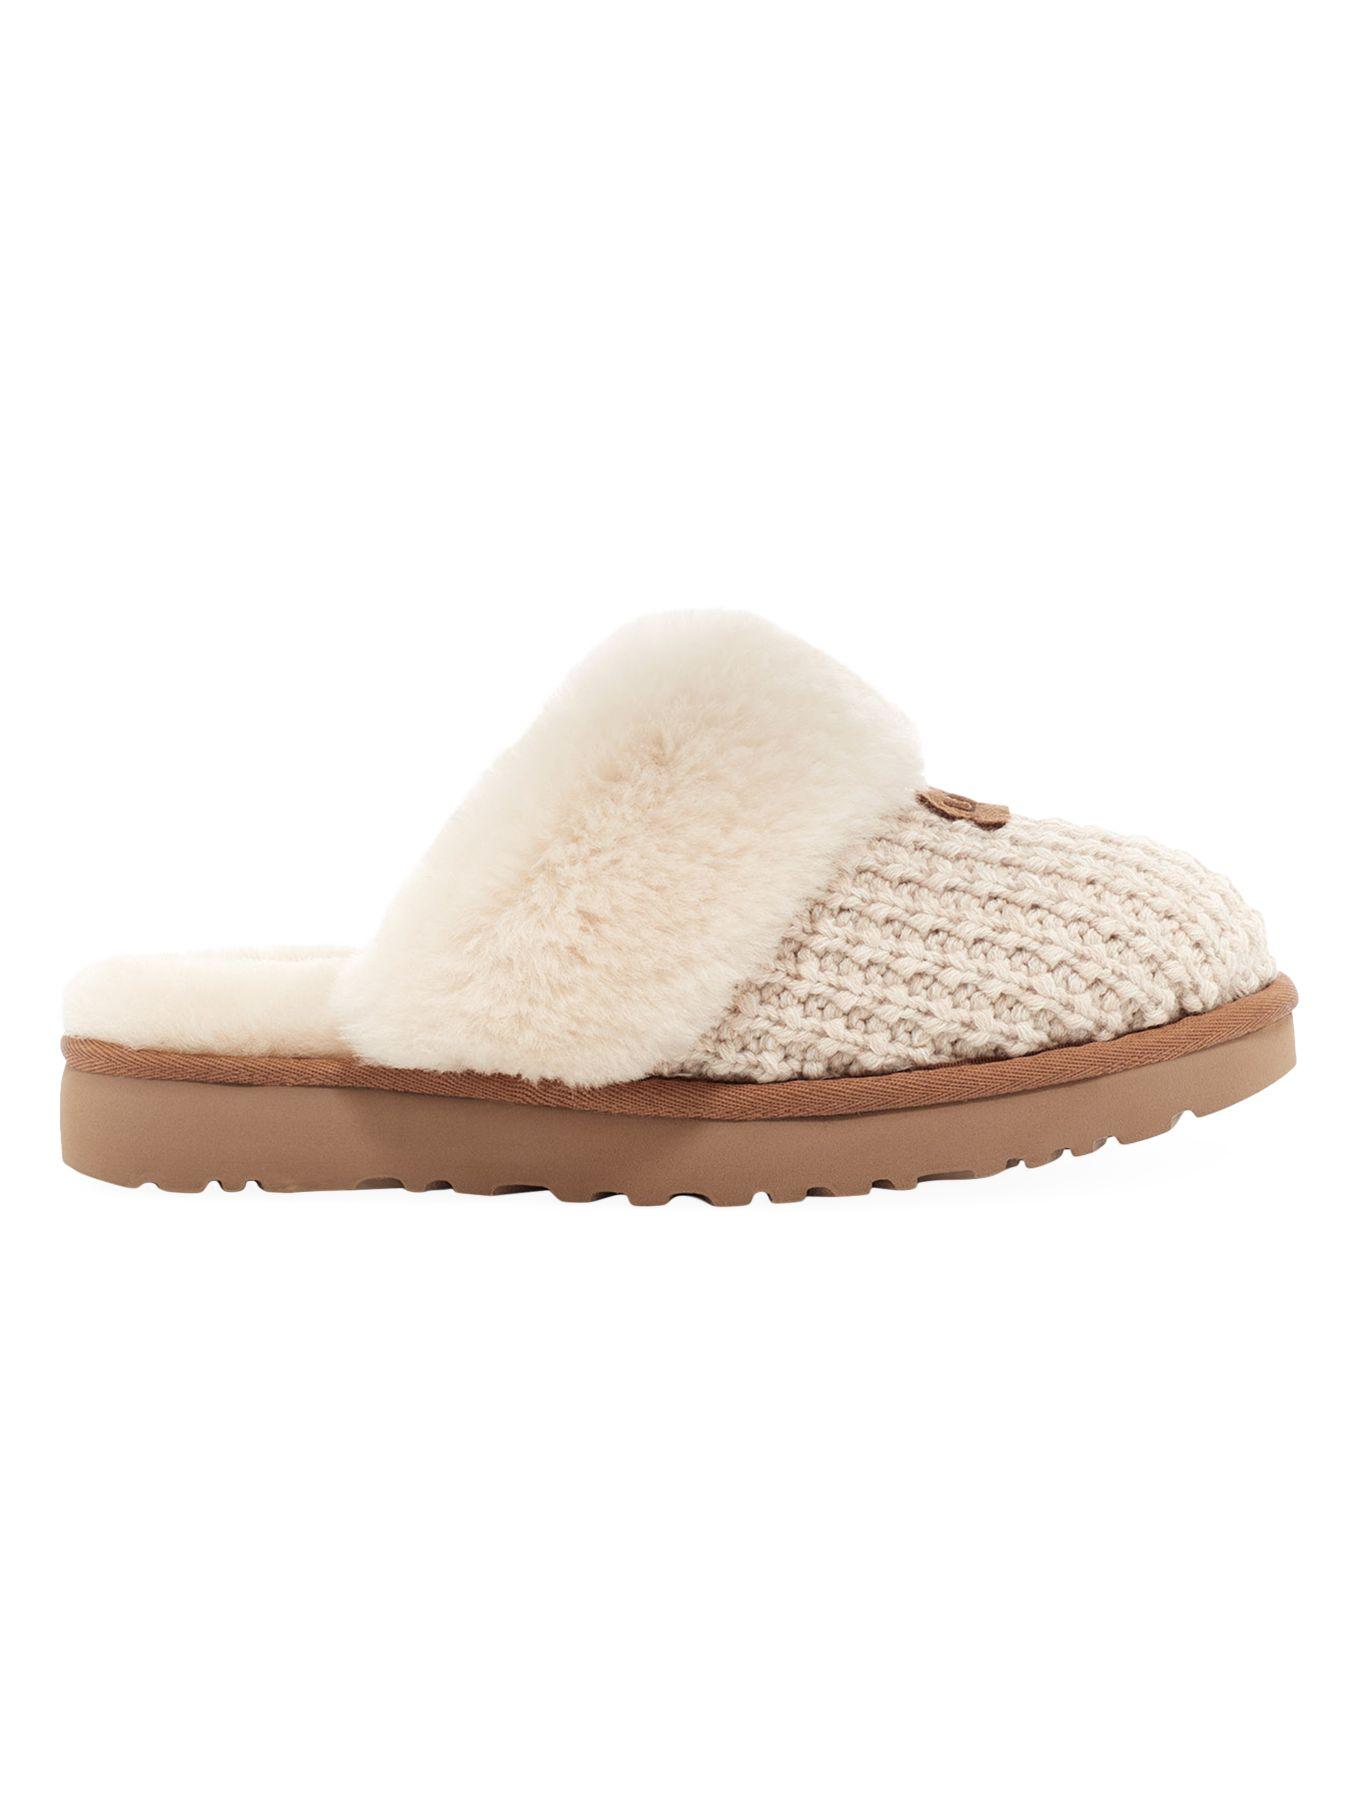 UGG Denim Cozy Sheepskin-lined Knit Slippers in Cream (Natural) - Lyst